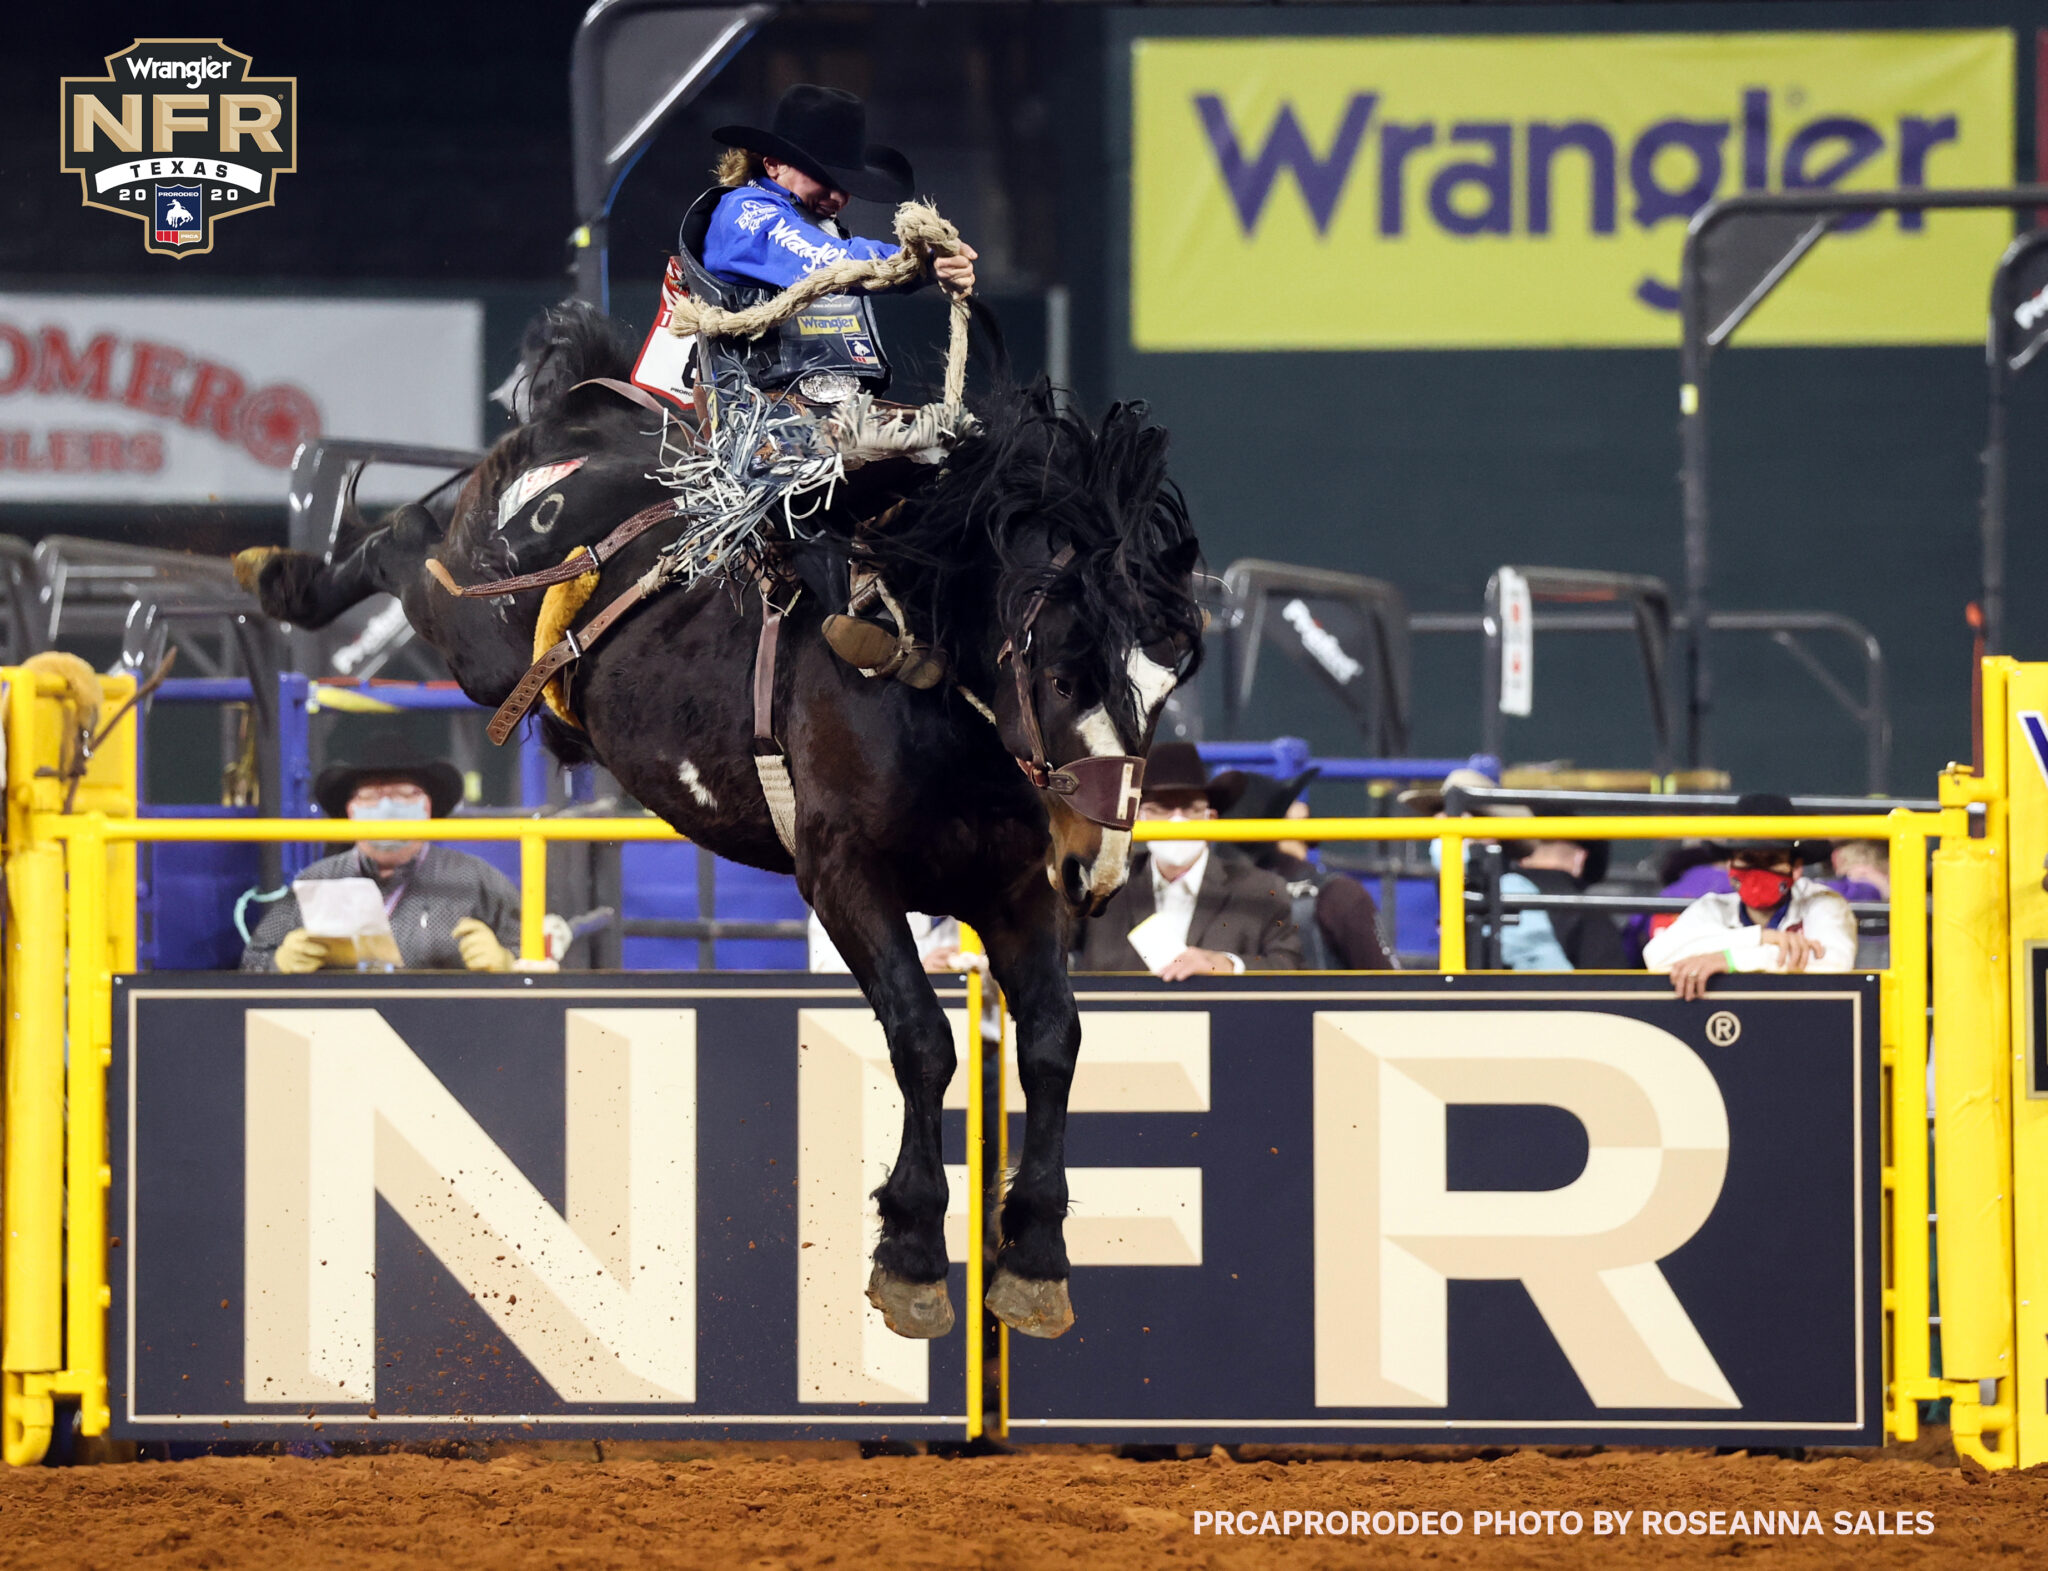 Wright Brothers load the bases at Texas Ranger stadium Round 3 WNFR